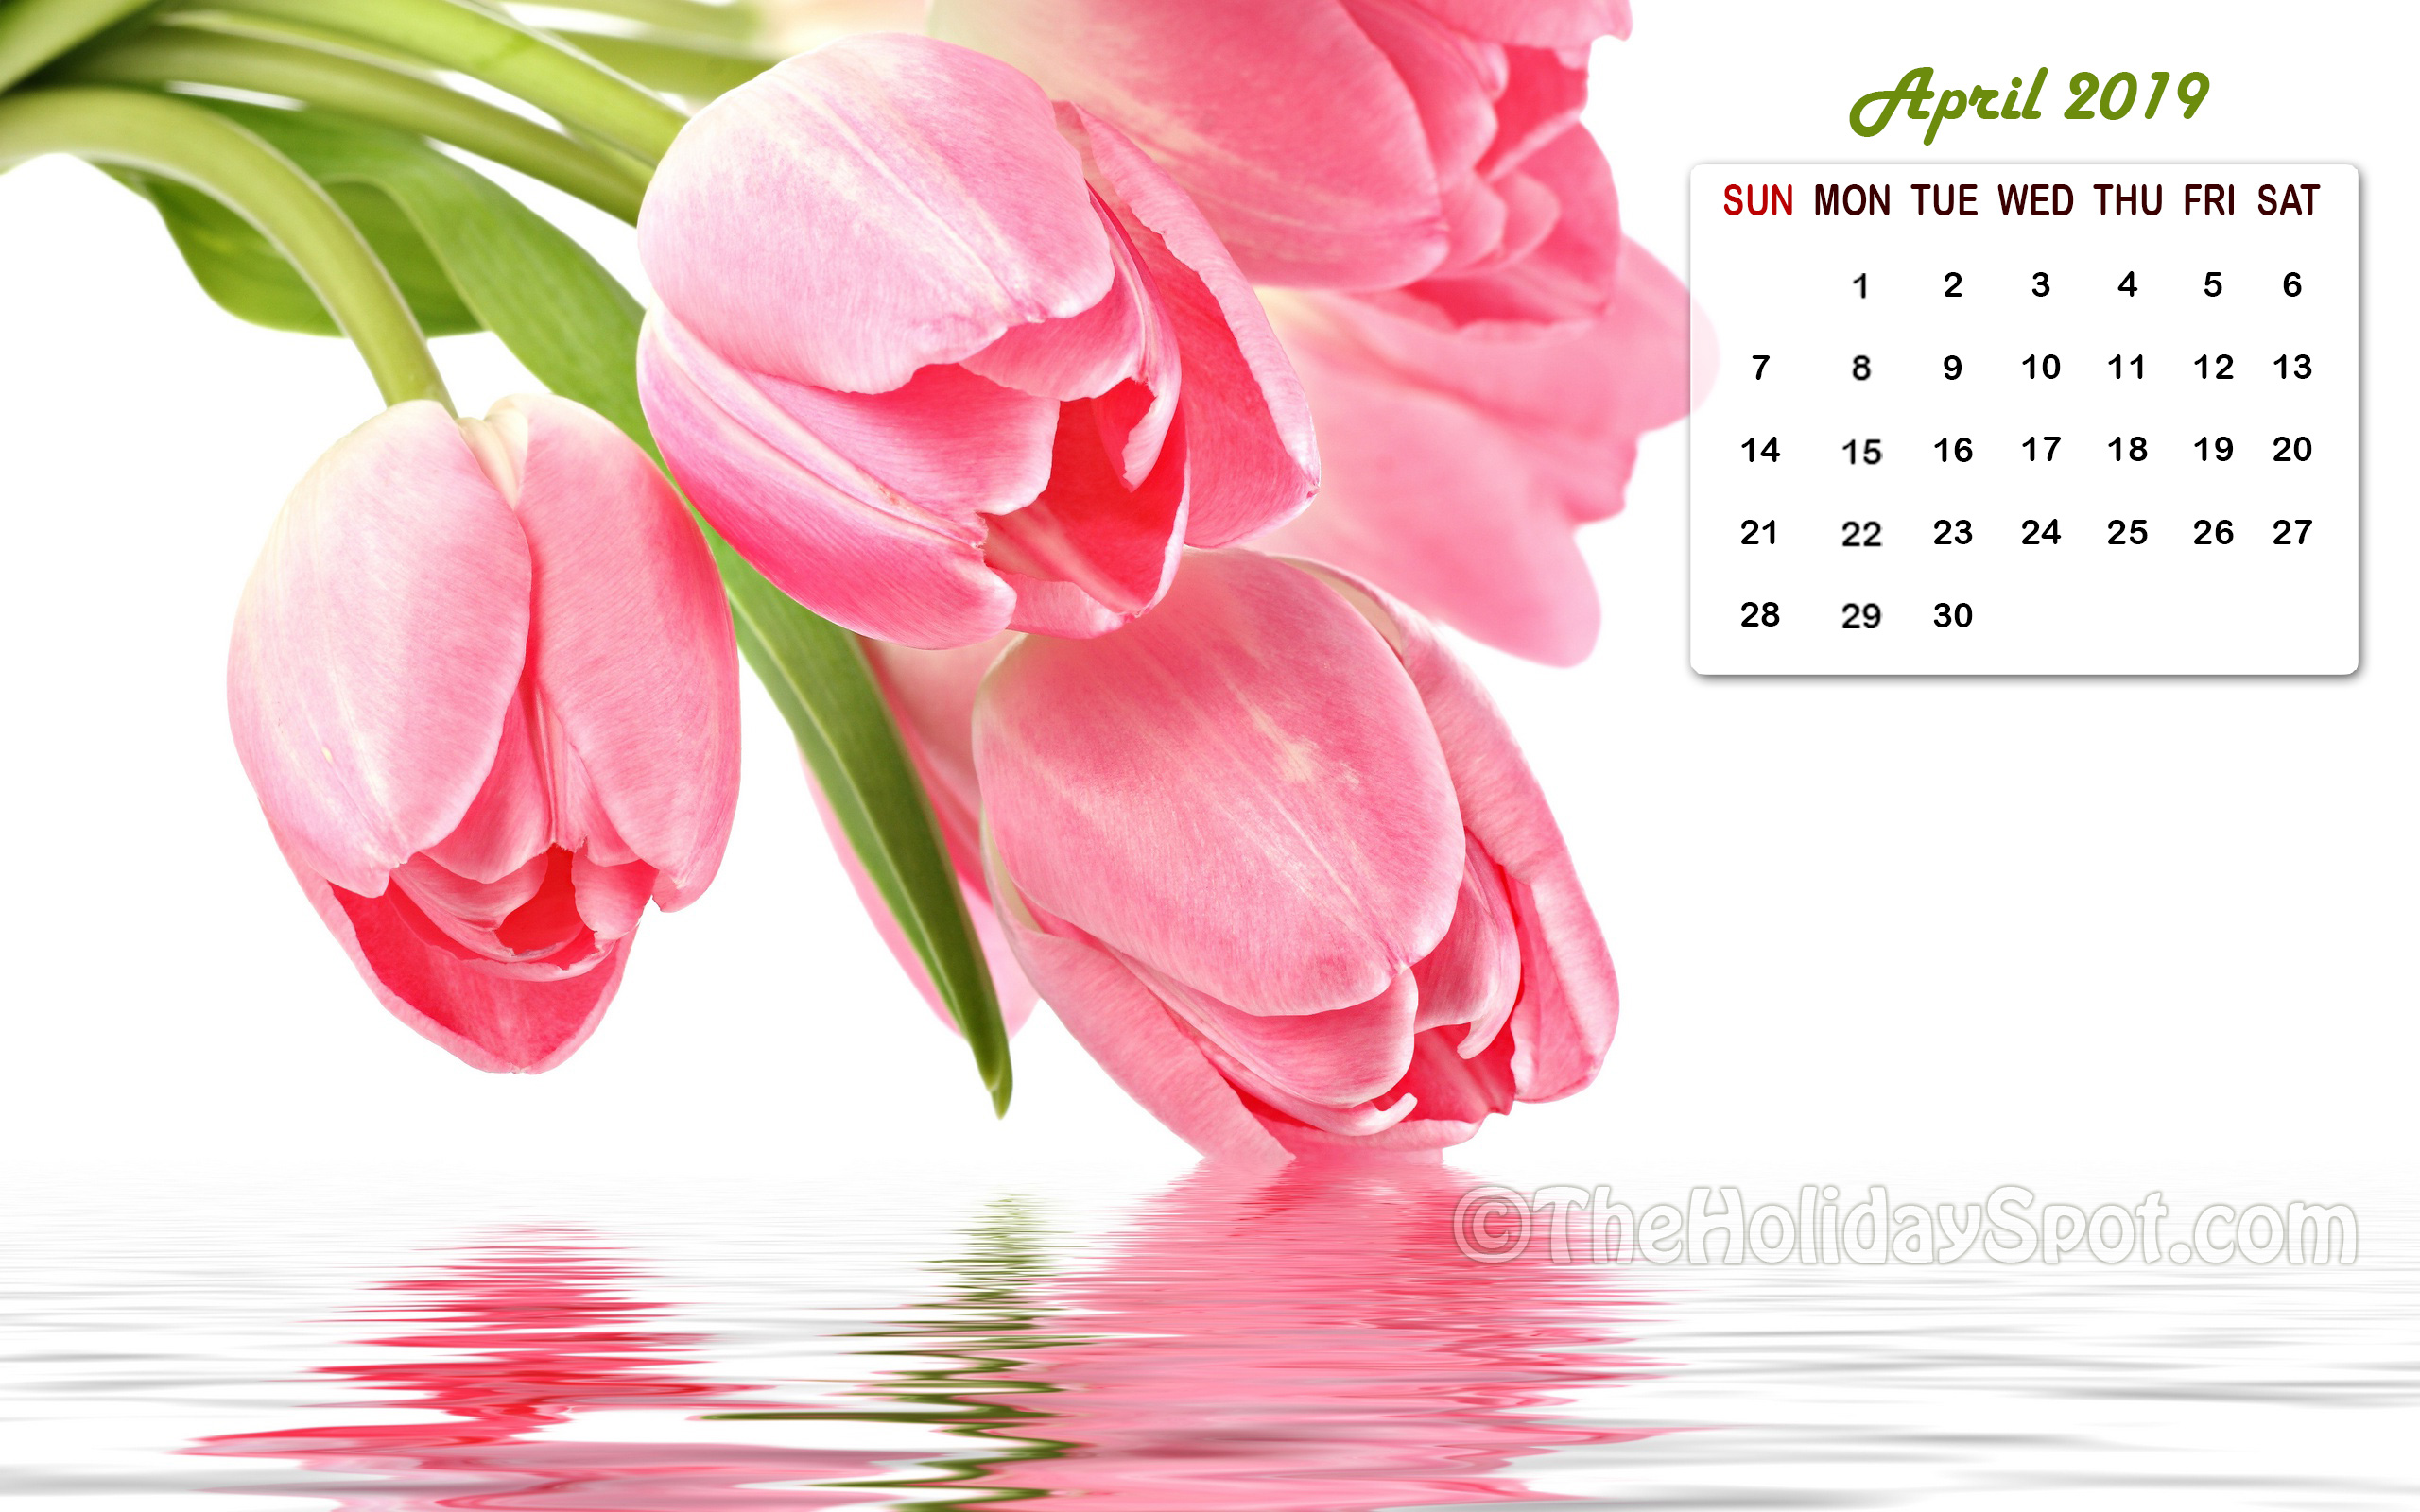 Month wise Calendar Wallpapers of 2018 2019